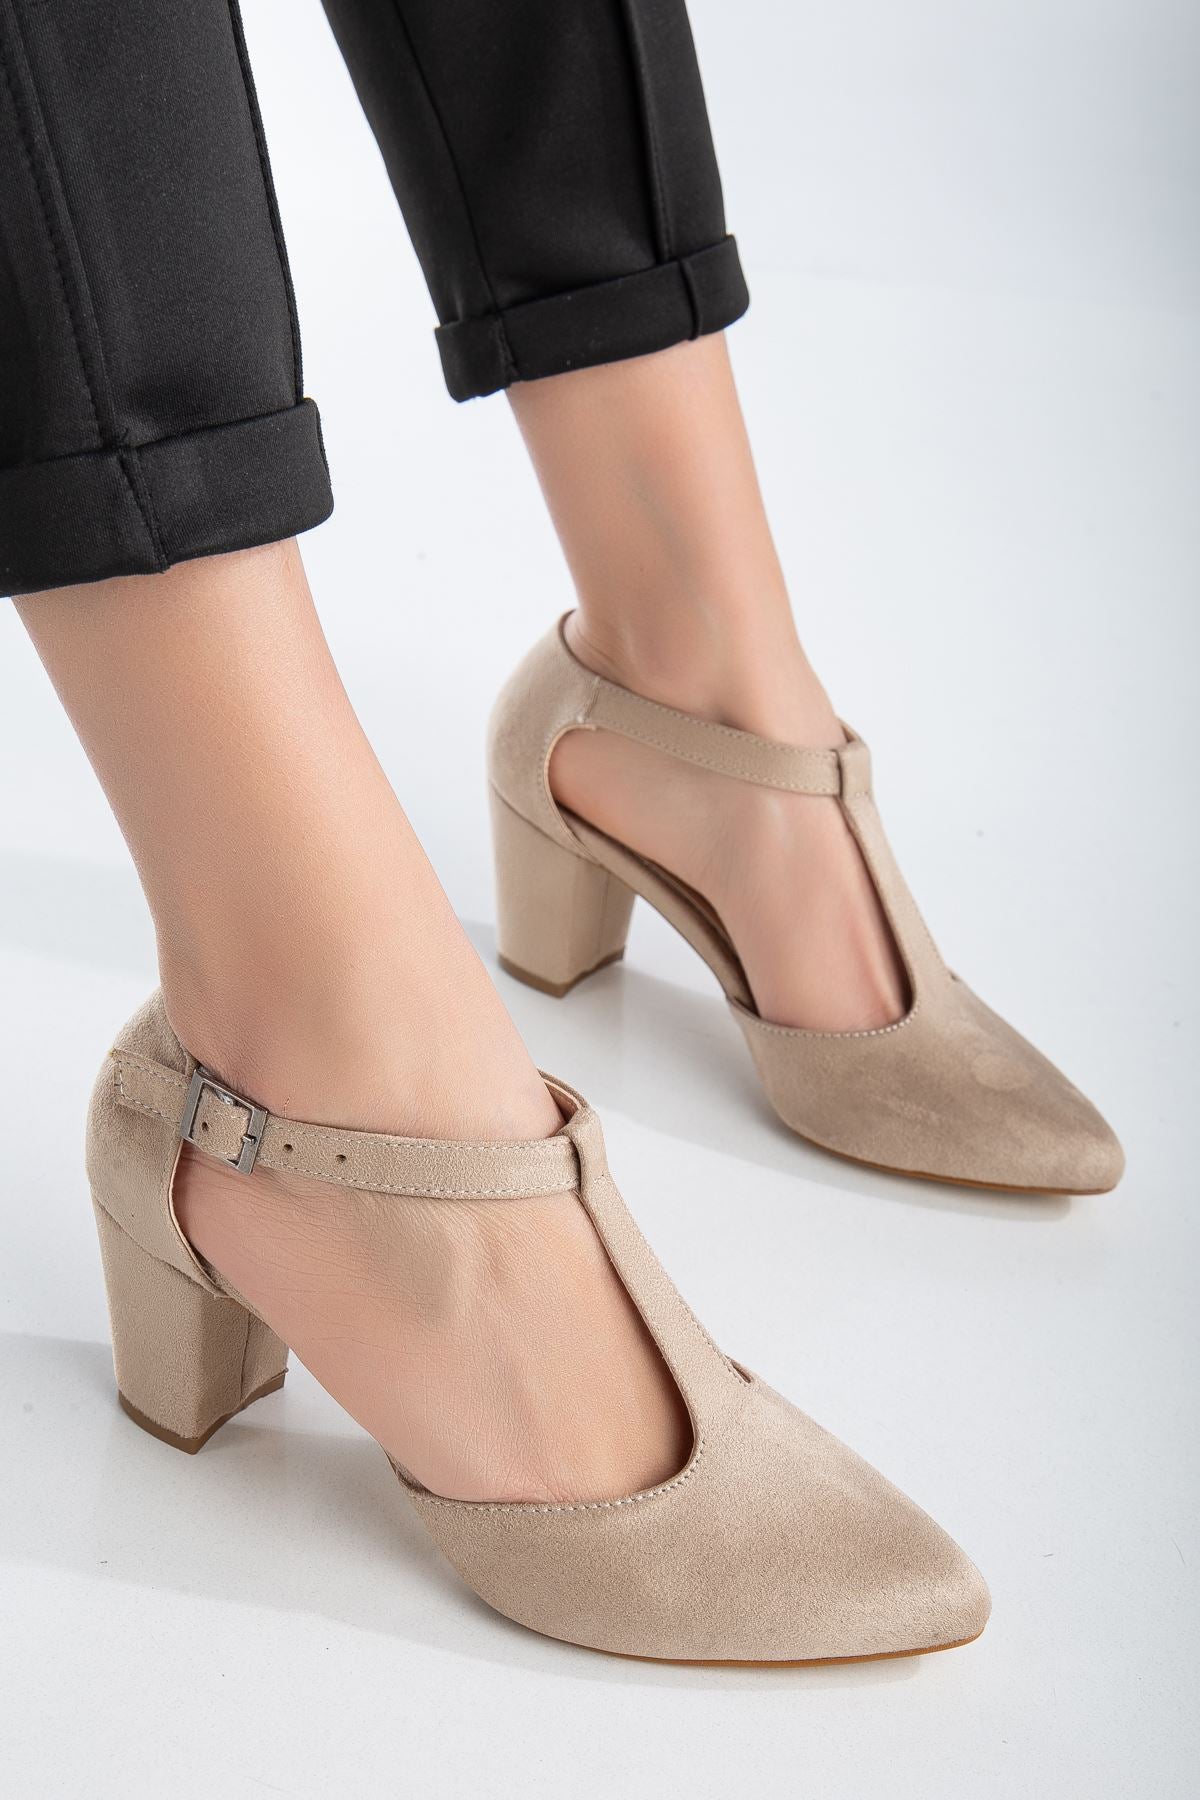 Niven Cream Suede Heeled Women's Shoes - STREETMODE™